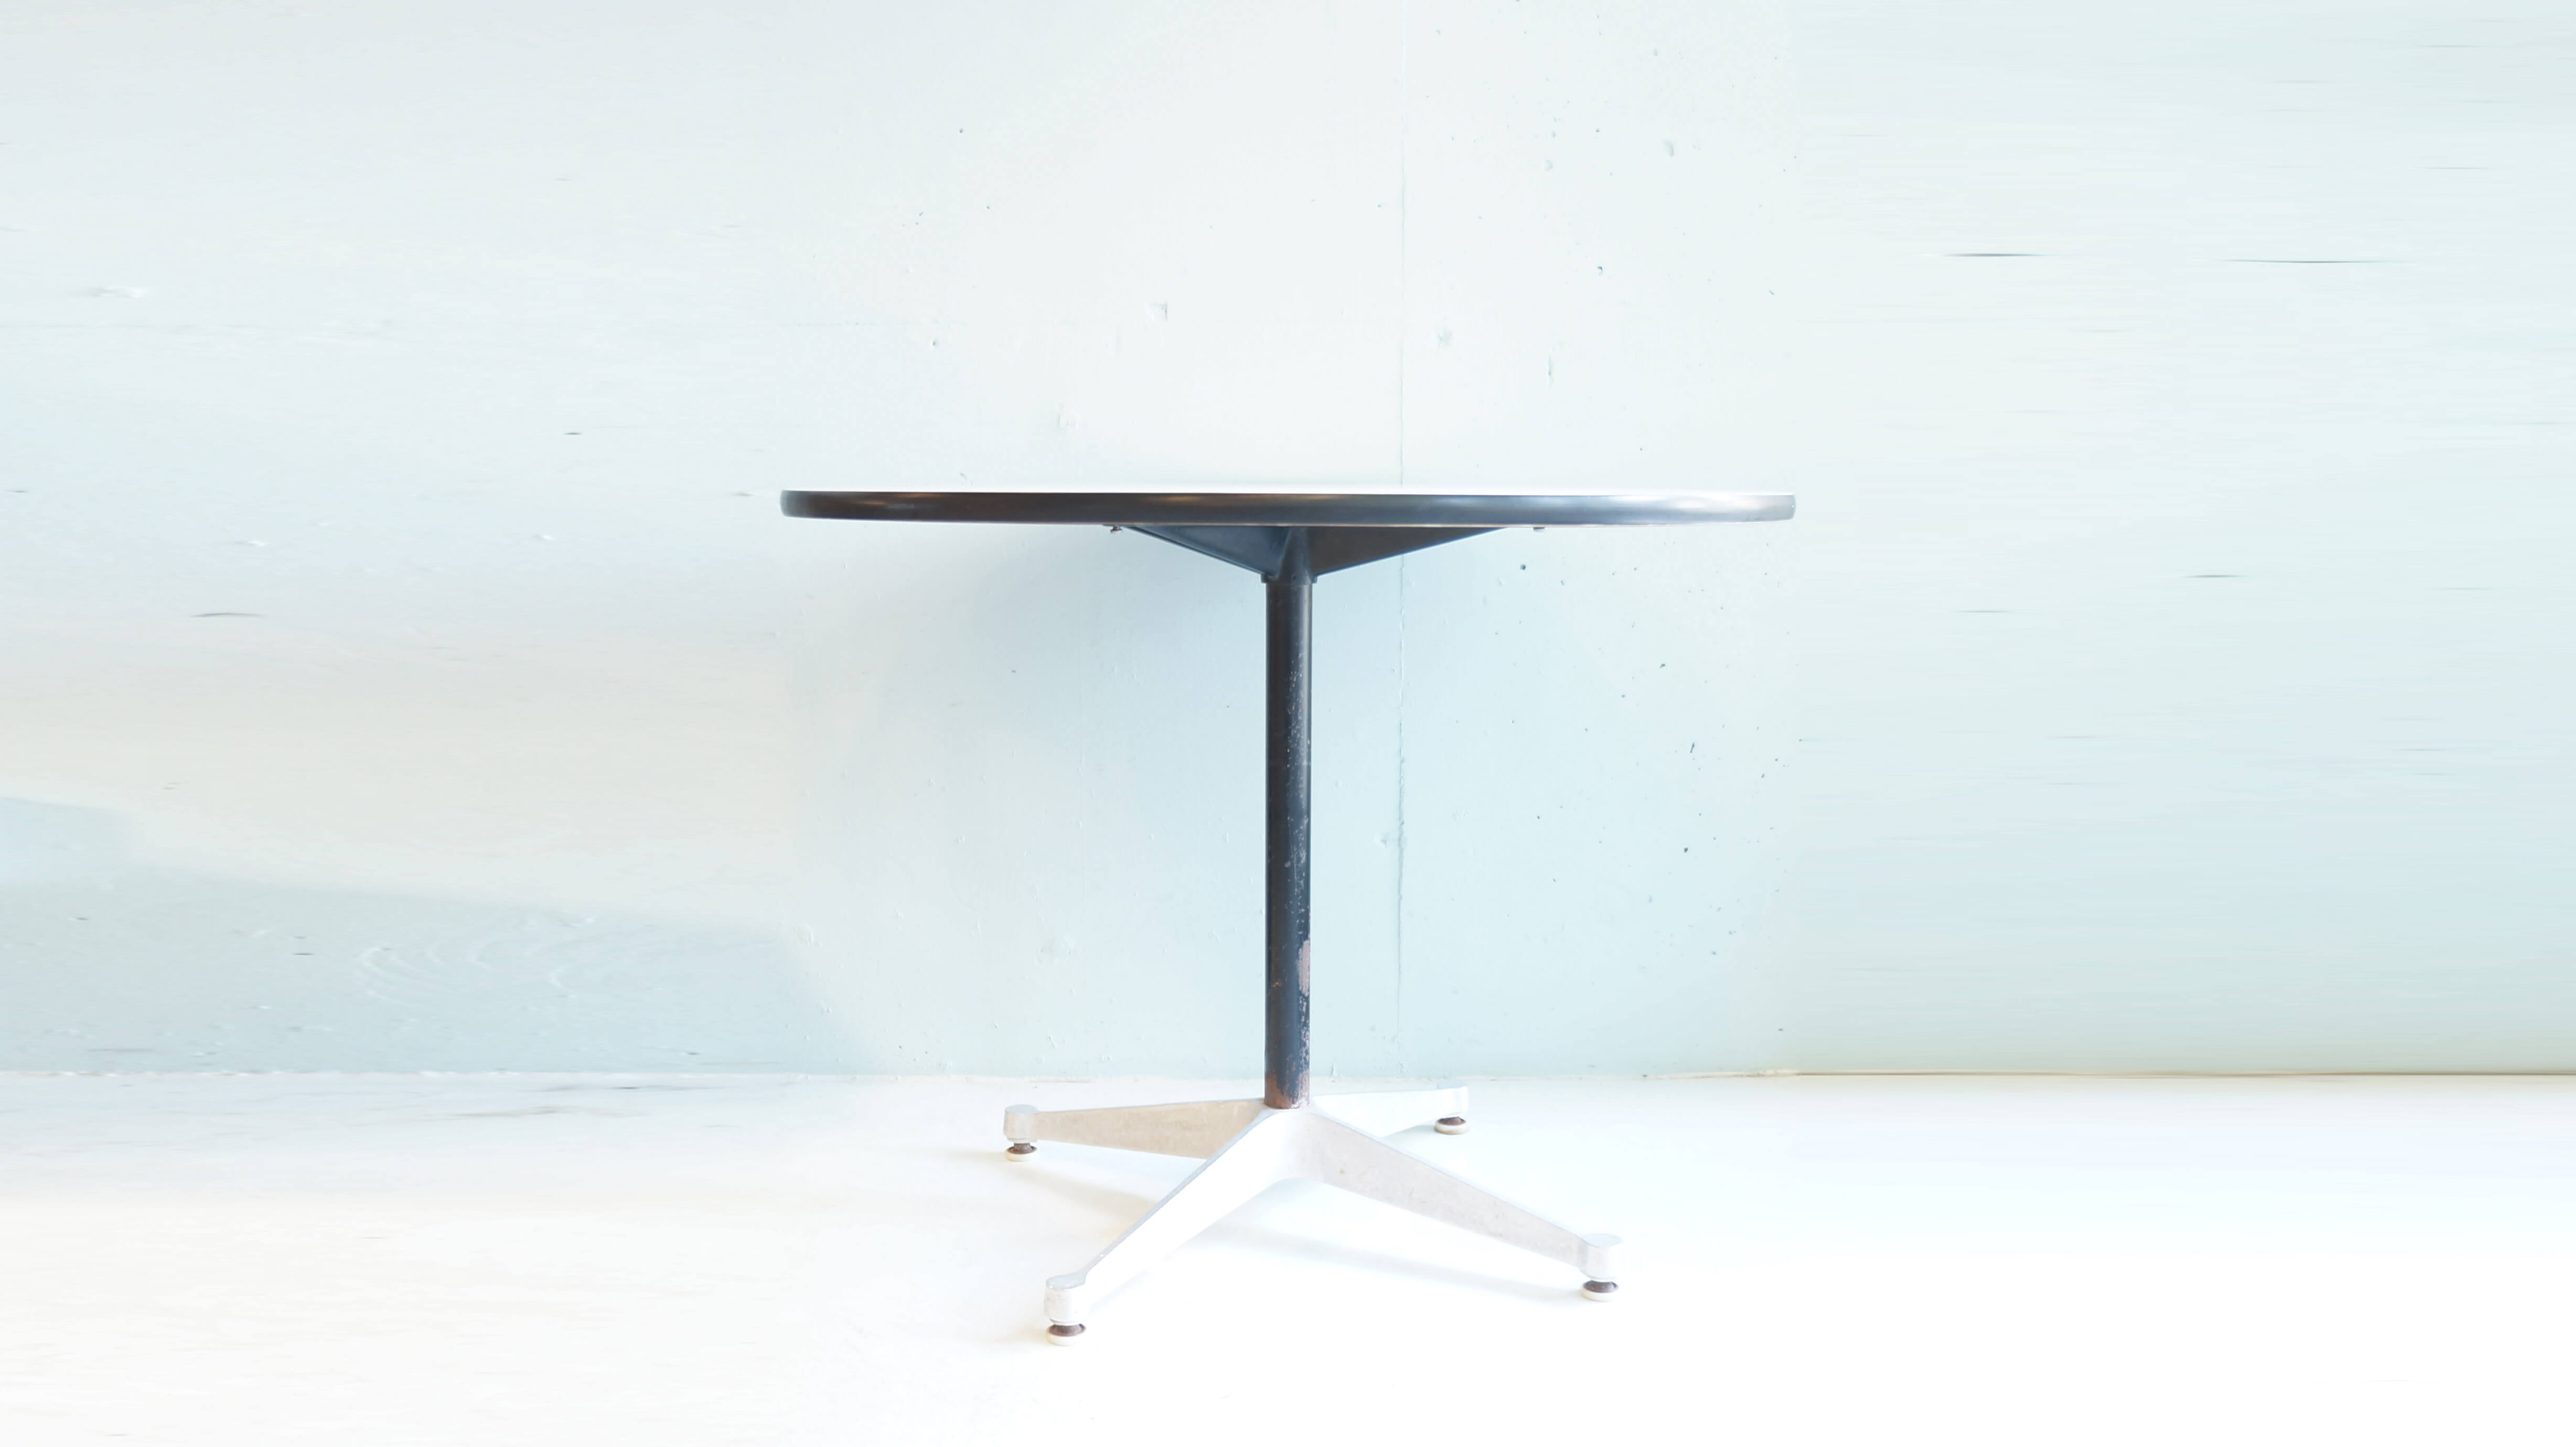 Herman Miller Eames Round Table with Contract base / ハーマンミラー イームズテーブル コントラクトベース